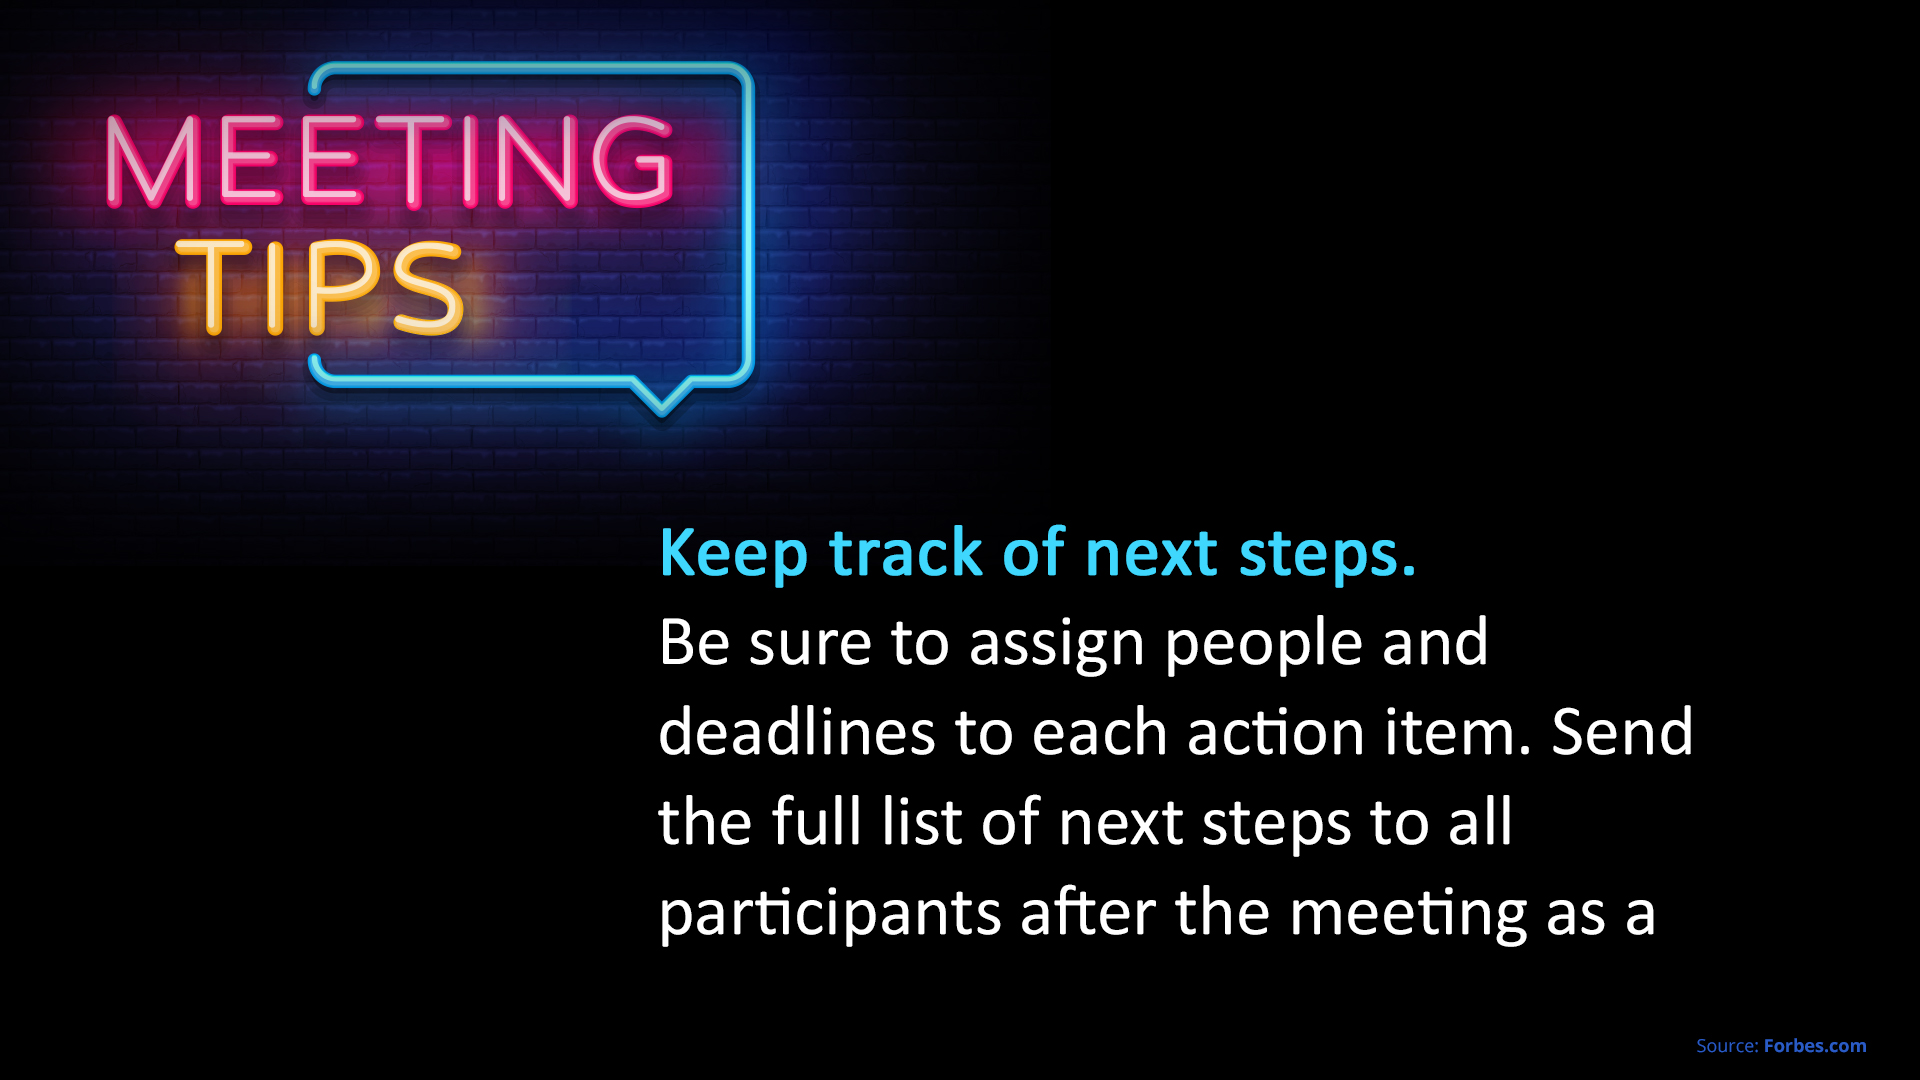 Free Graphic | Meeting Tips | Keep track of next steps